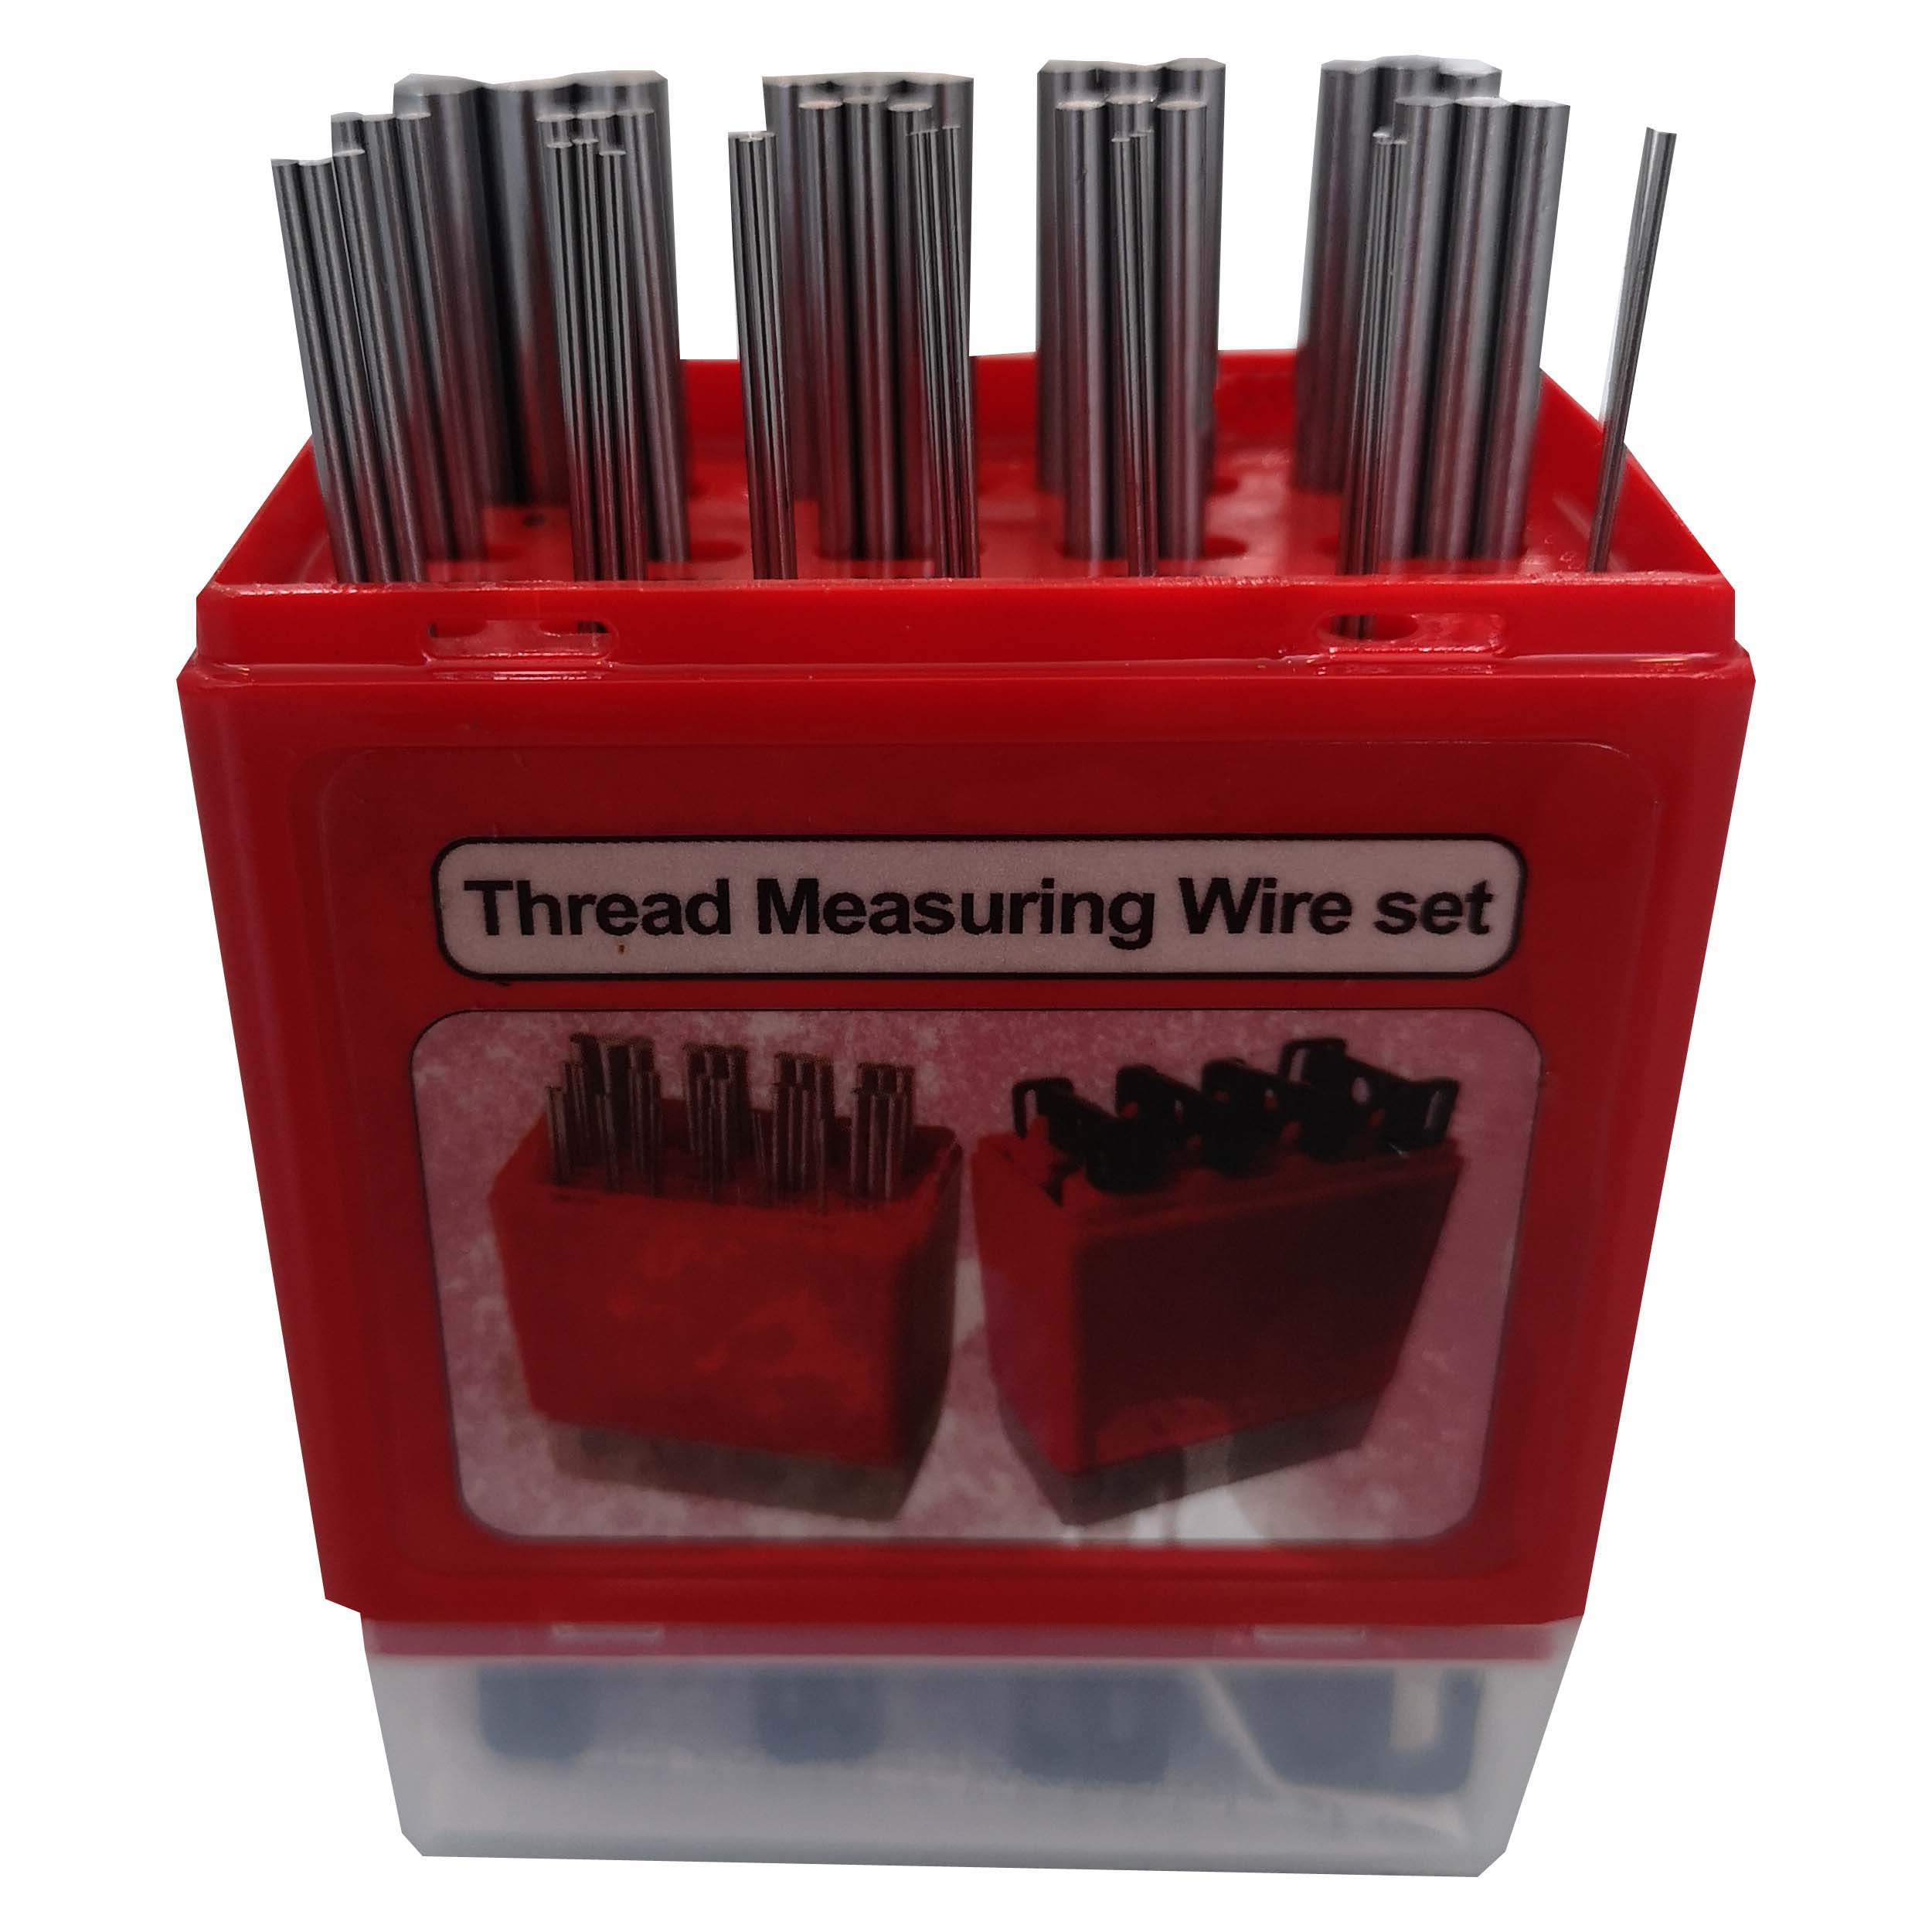 Thread Measuring Wire Sets